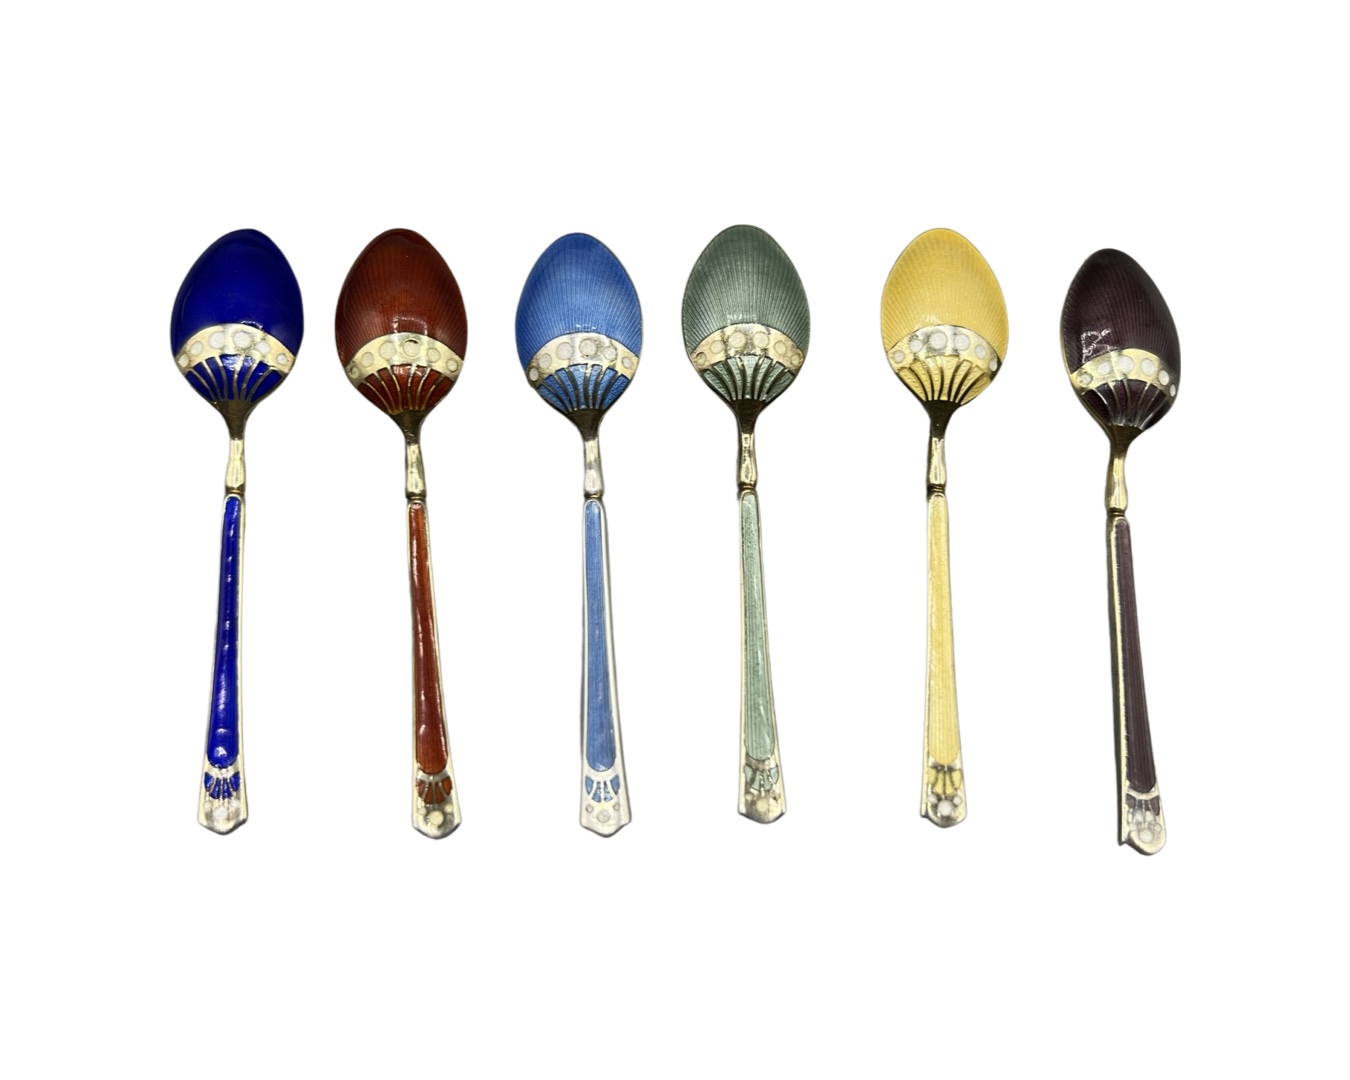 Vintage Harrods 1955 Hallmarked Sterling Silver and Enamel Spoon Set, in good condition with - Image 3 of 3